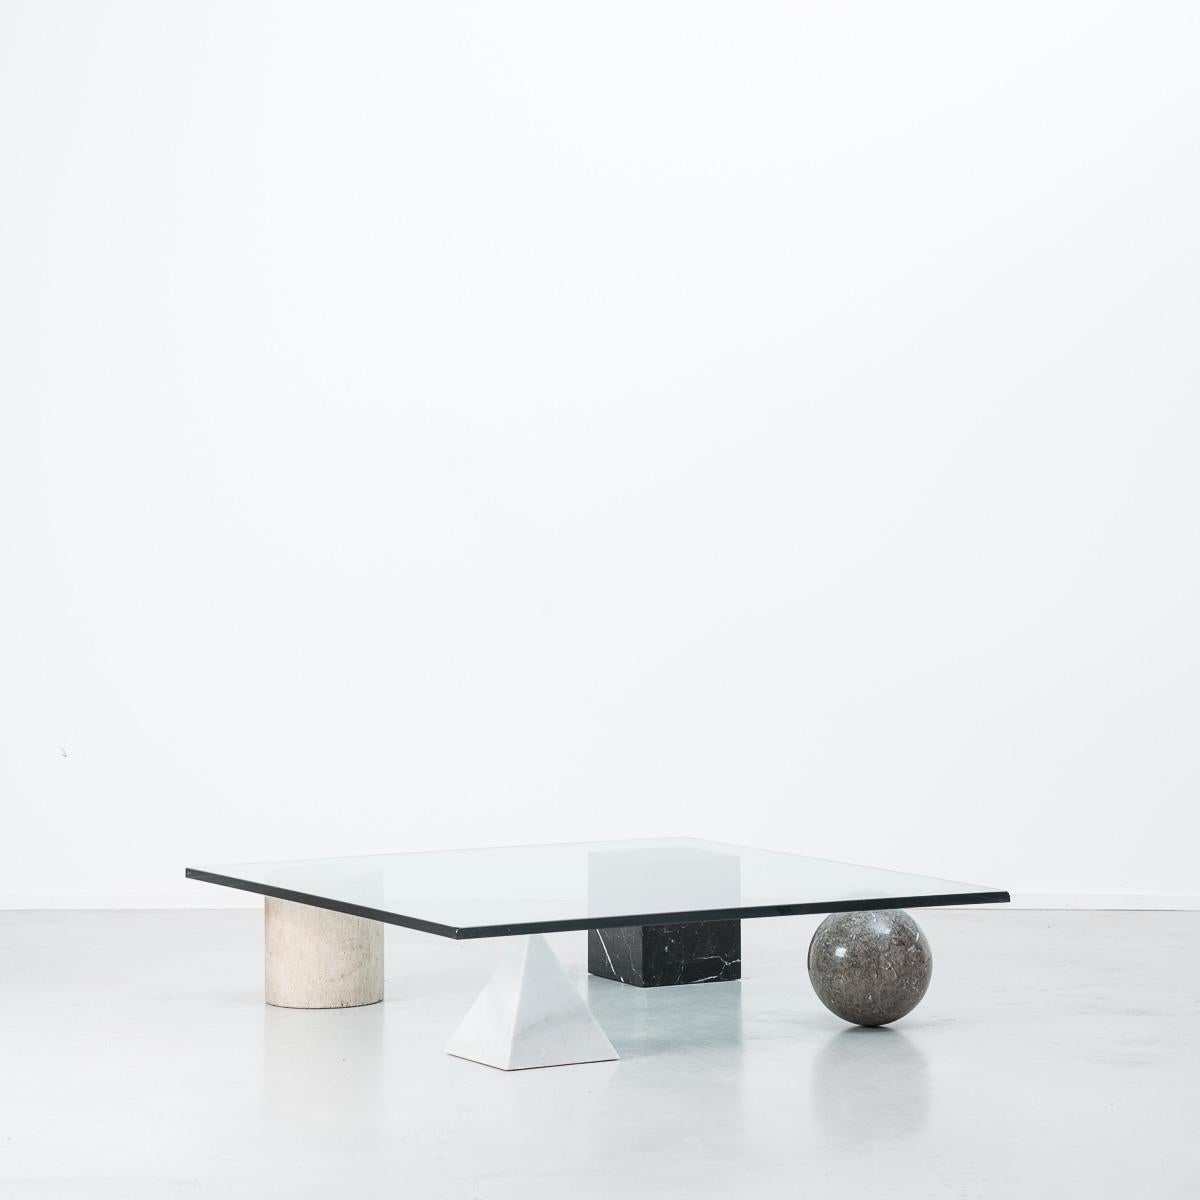 A stunning and sculptural coffee table inspired by the four forms of Euclidean geometry, the cube, the pyramid, the cylinder and the sphere. The four elements can be positioned freely for a unique composition. 

The elements are made from